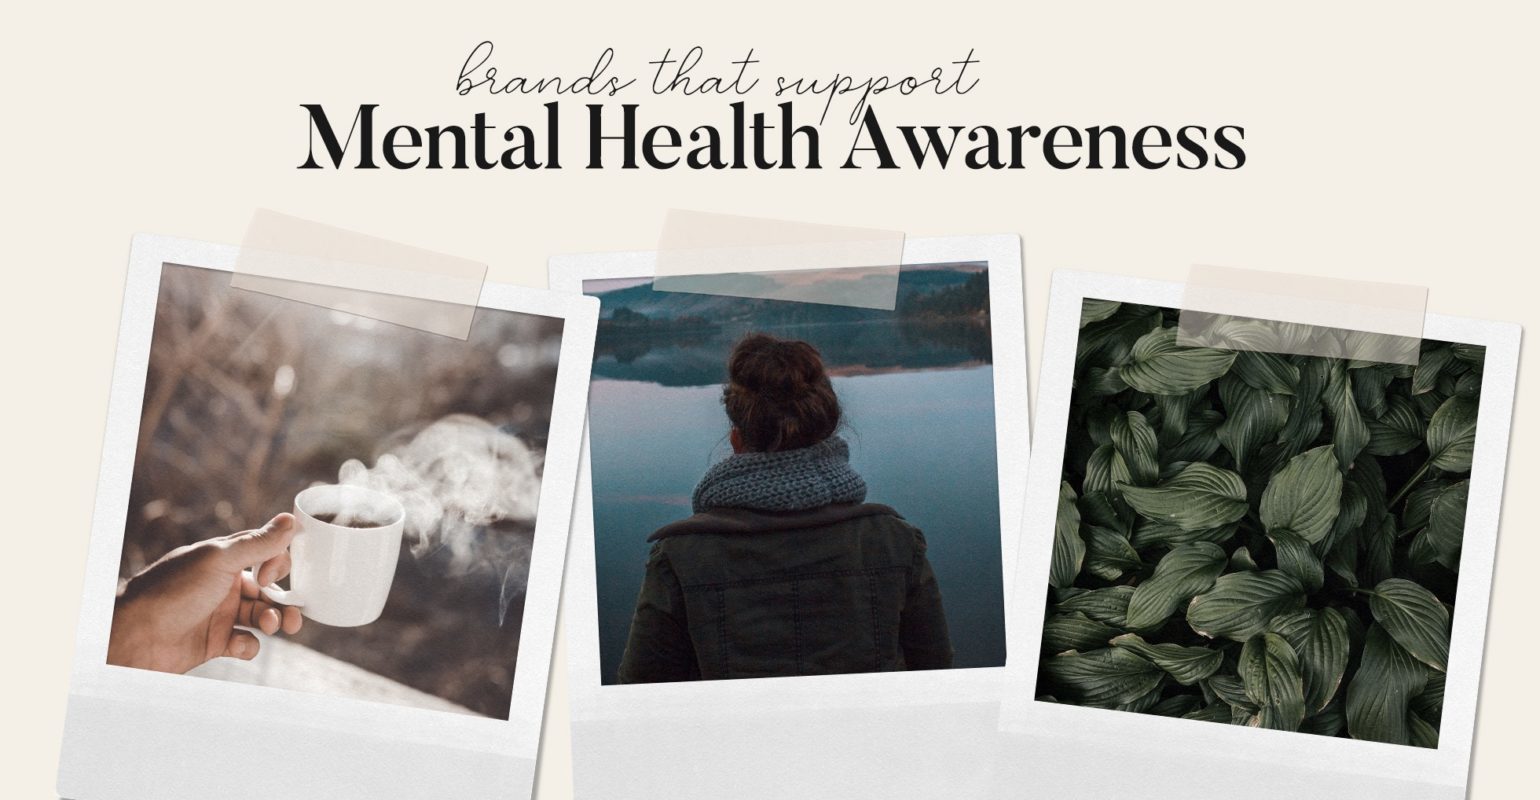 8 Brands That Support Mental Health Awareness